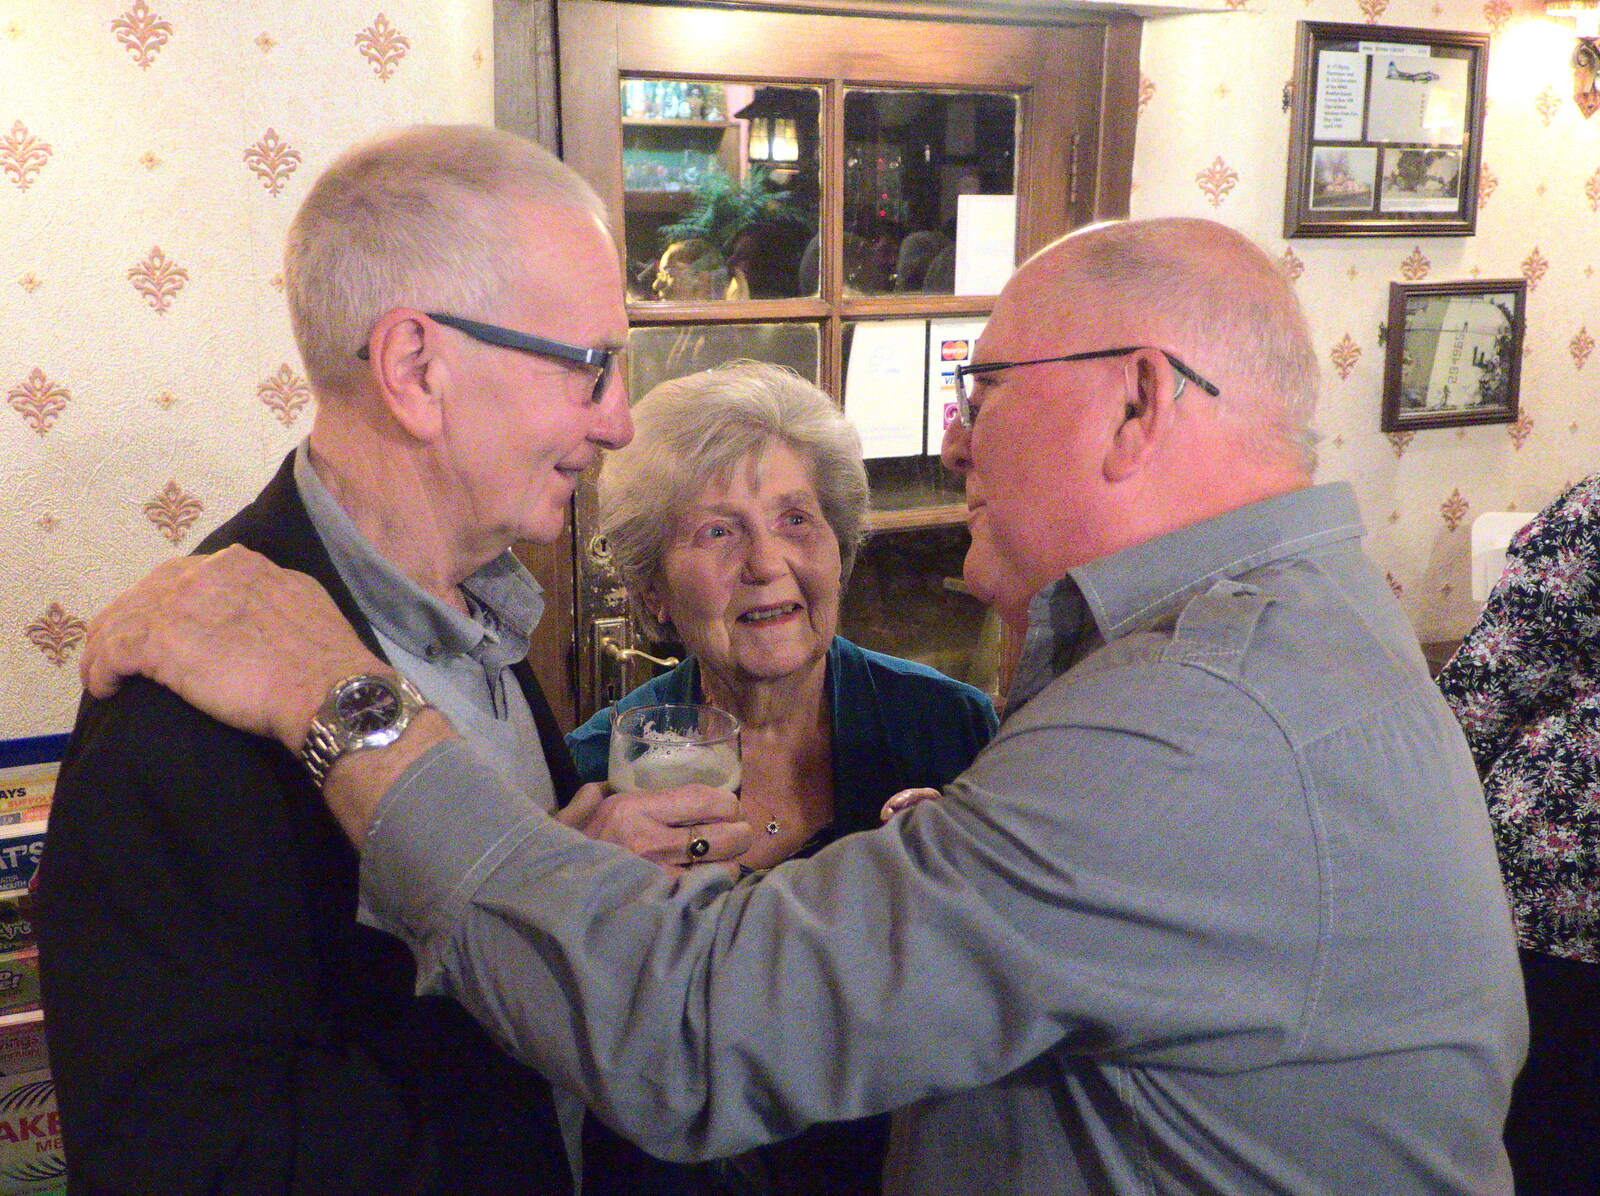 John Willy and his mum from John Willy's 65th and Other Stories, The Swan, Brome, Suffolk - 31st October 2015